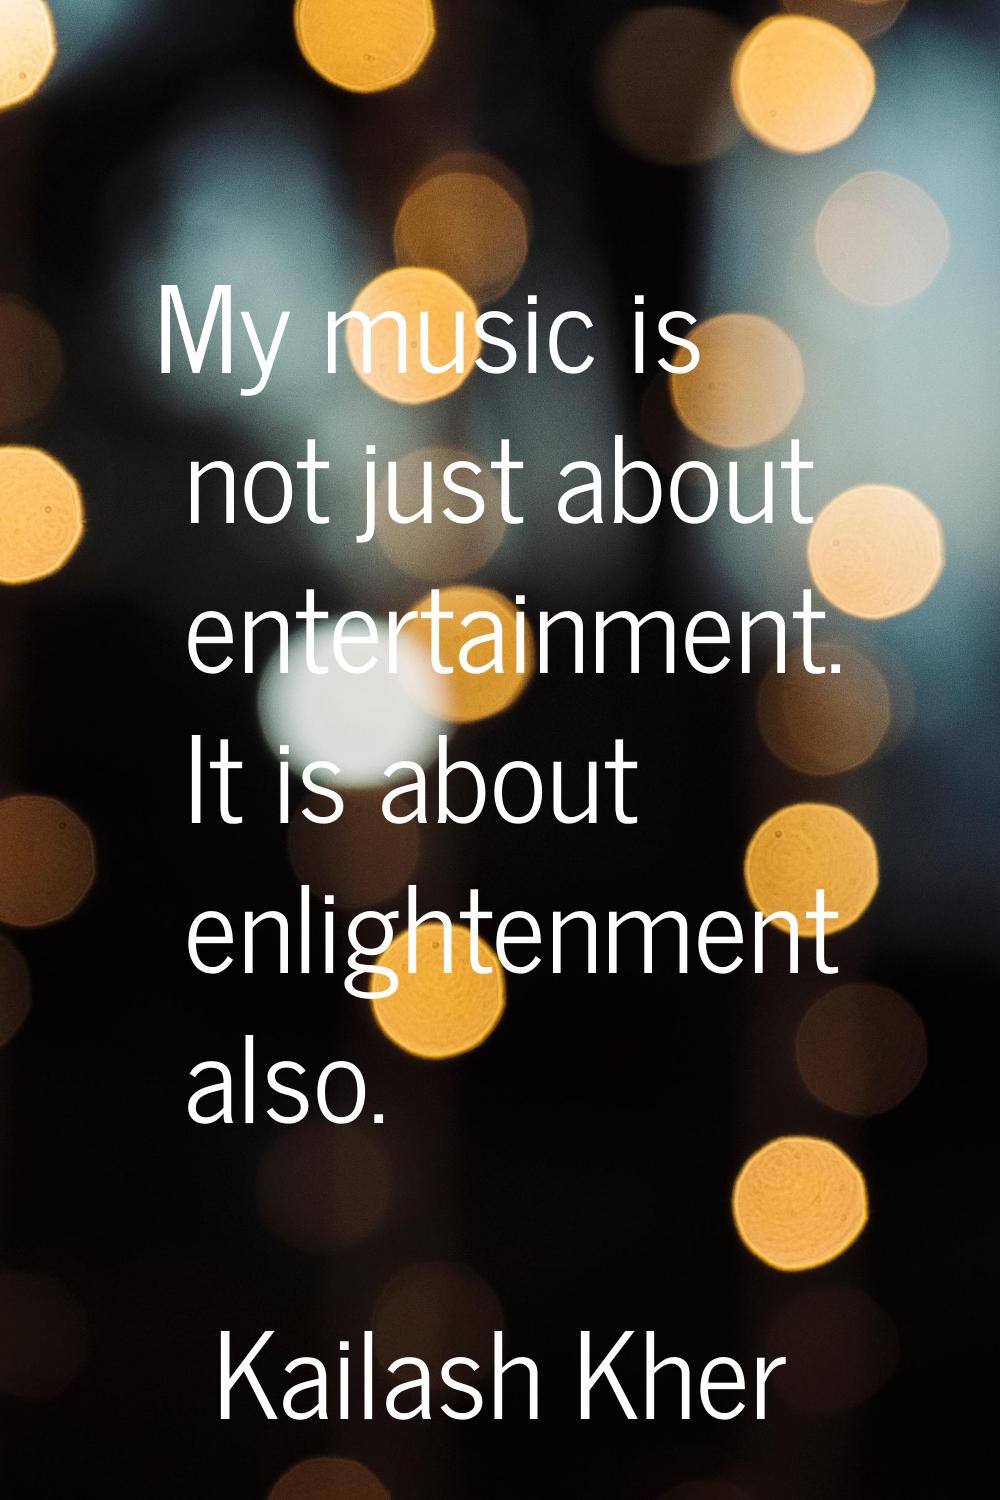 My music is not just about entertainment. It is about enlightenment also.